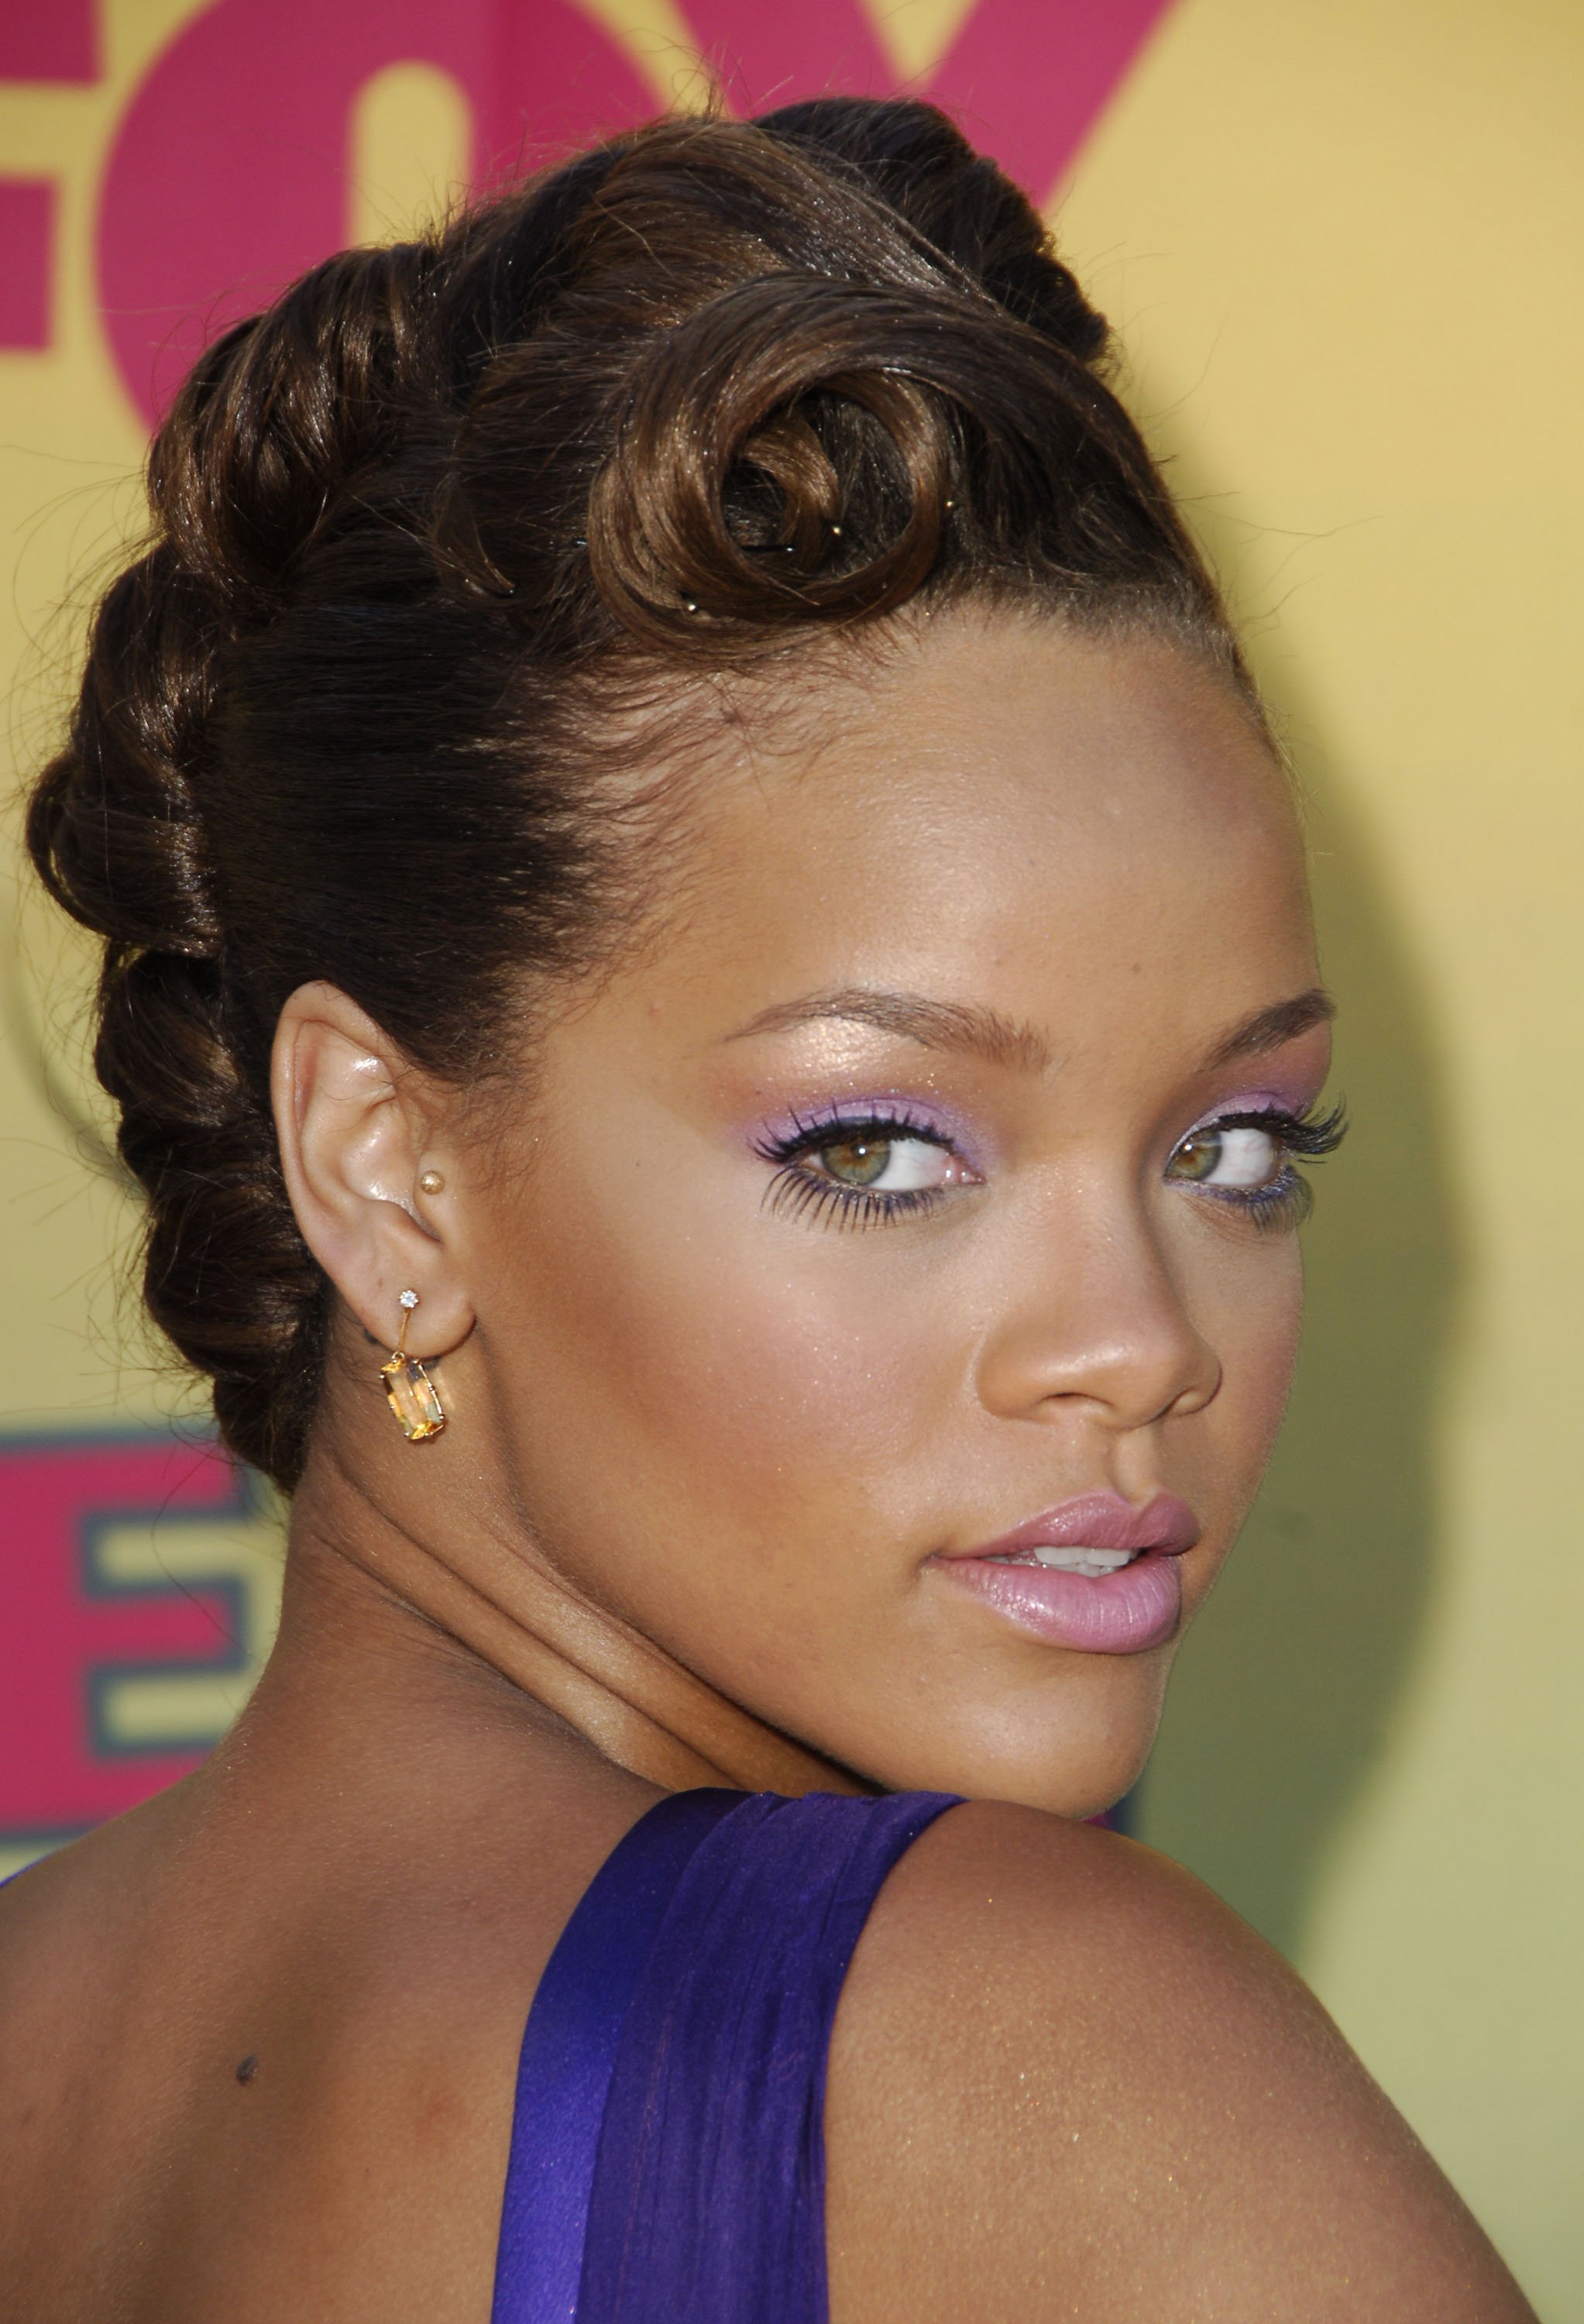 Rihanna poses at the 2006 Teens' Choice Awards at the Gibson Amphitheatre in Universal City, California | Source: Getty Images